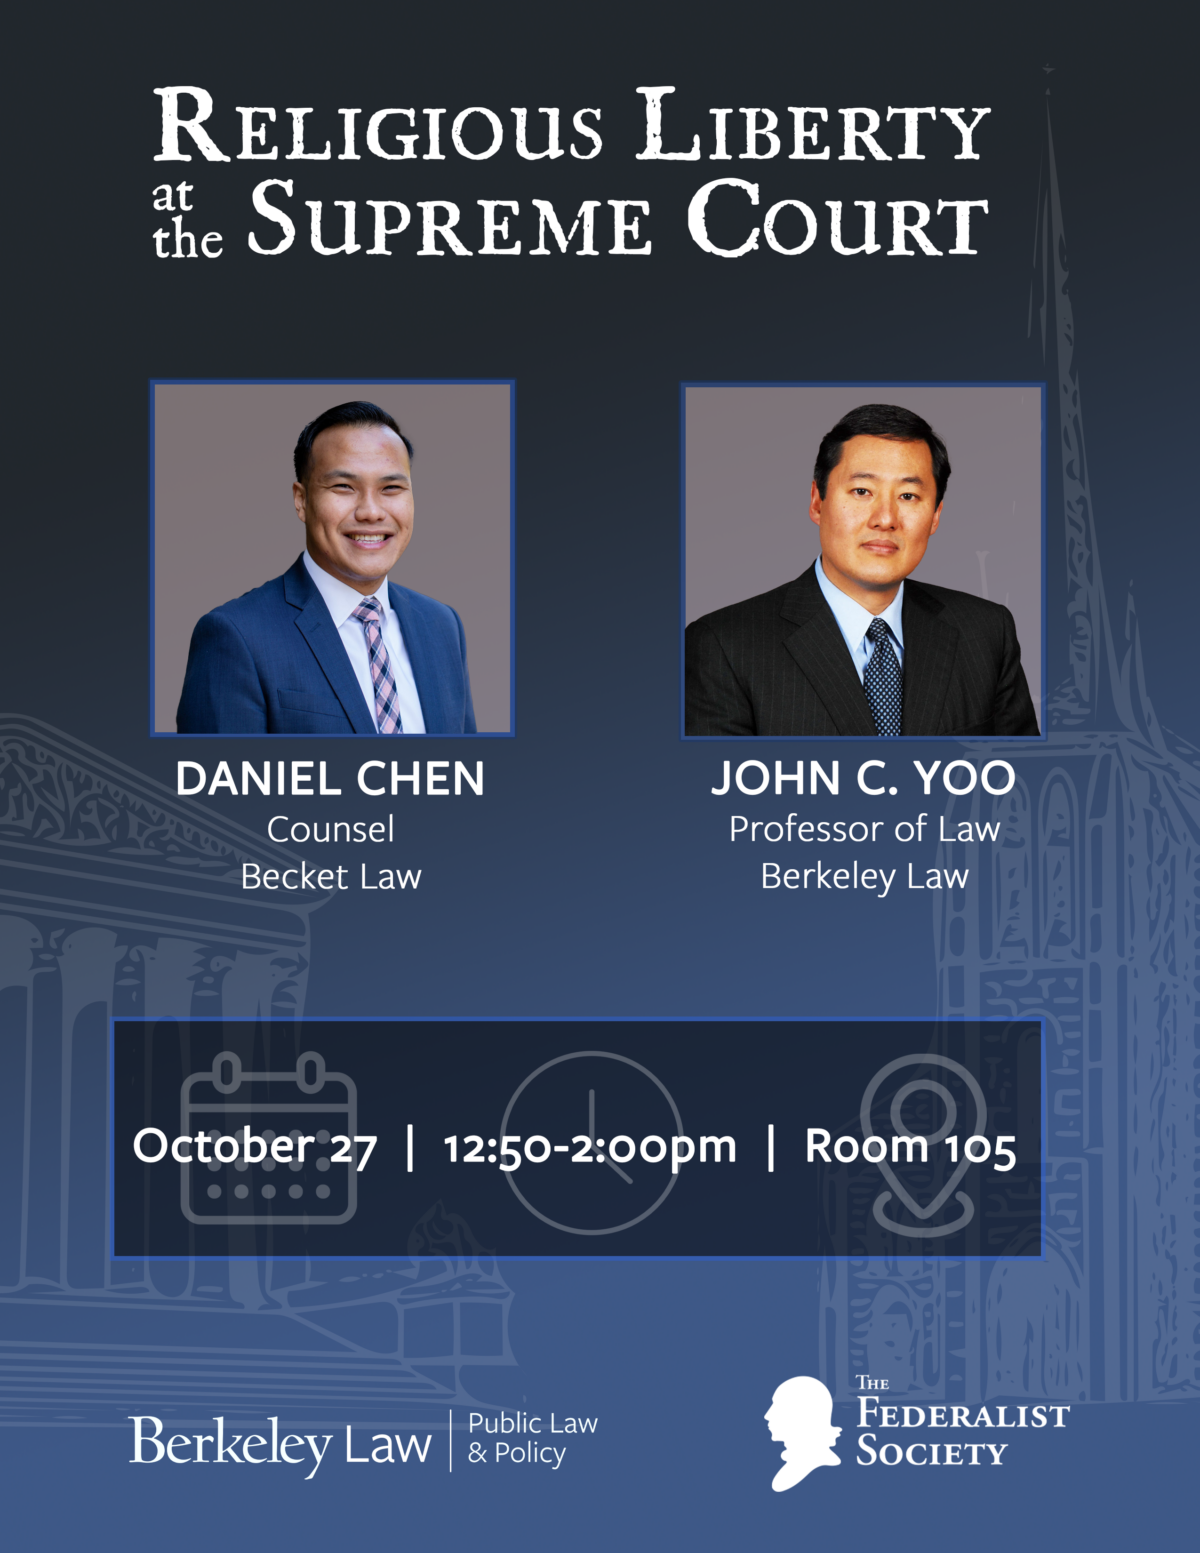 Religious Liberty in the Supreme Court Event Flyer